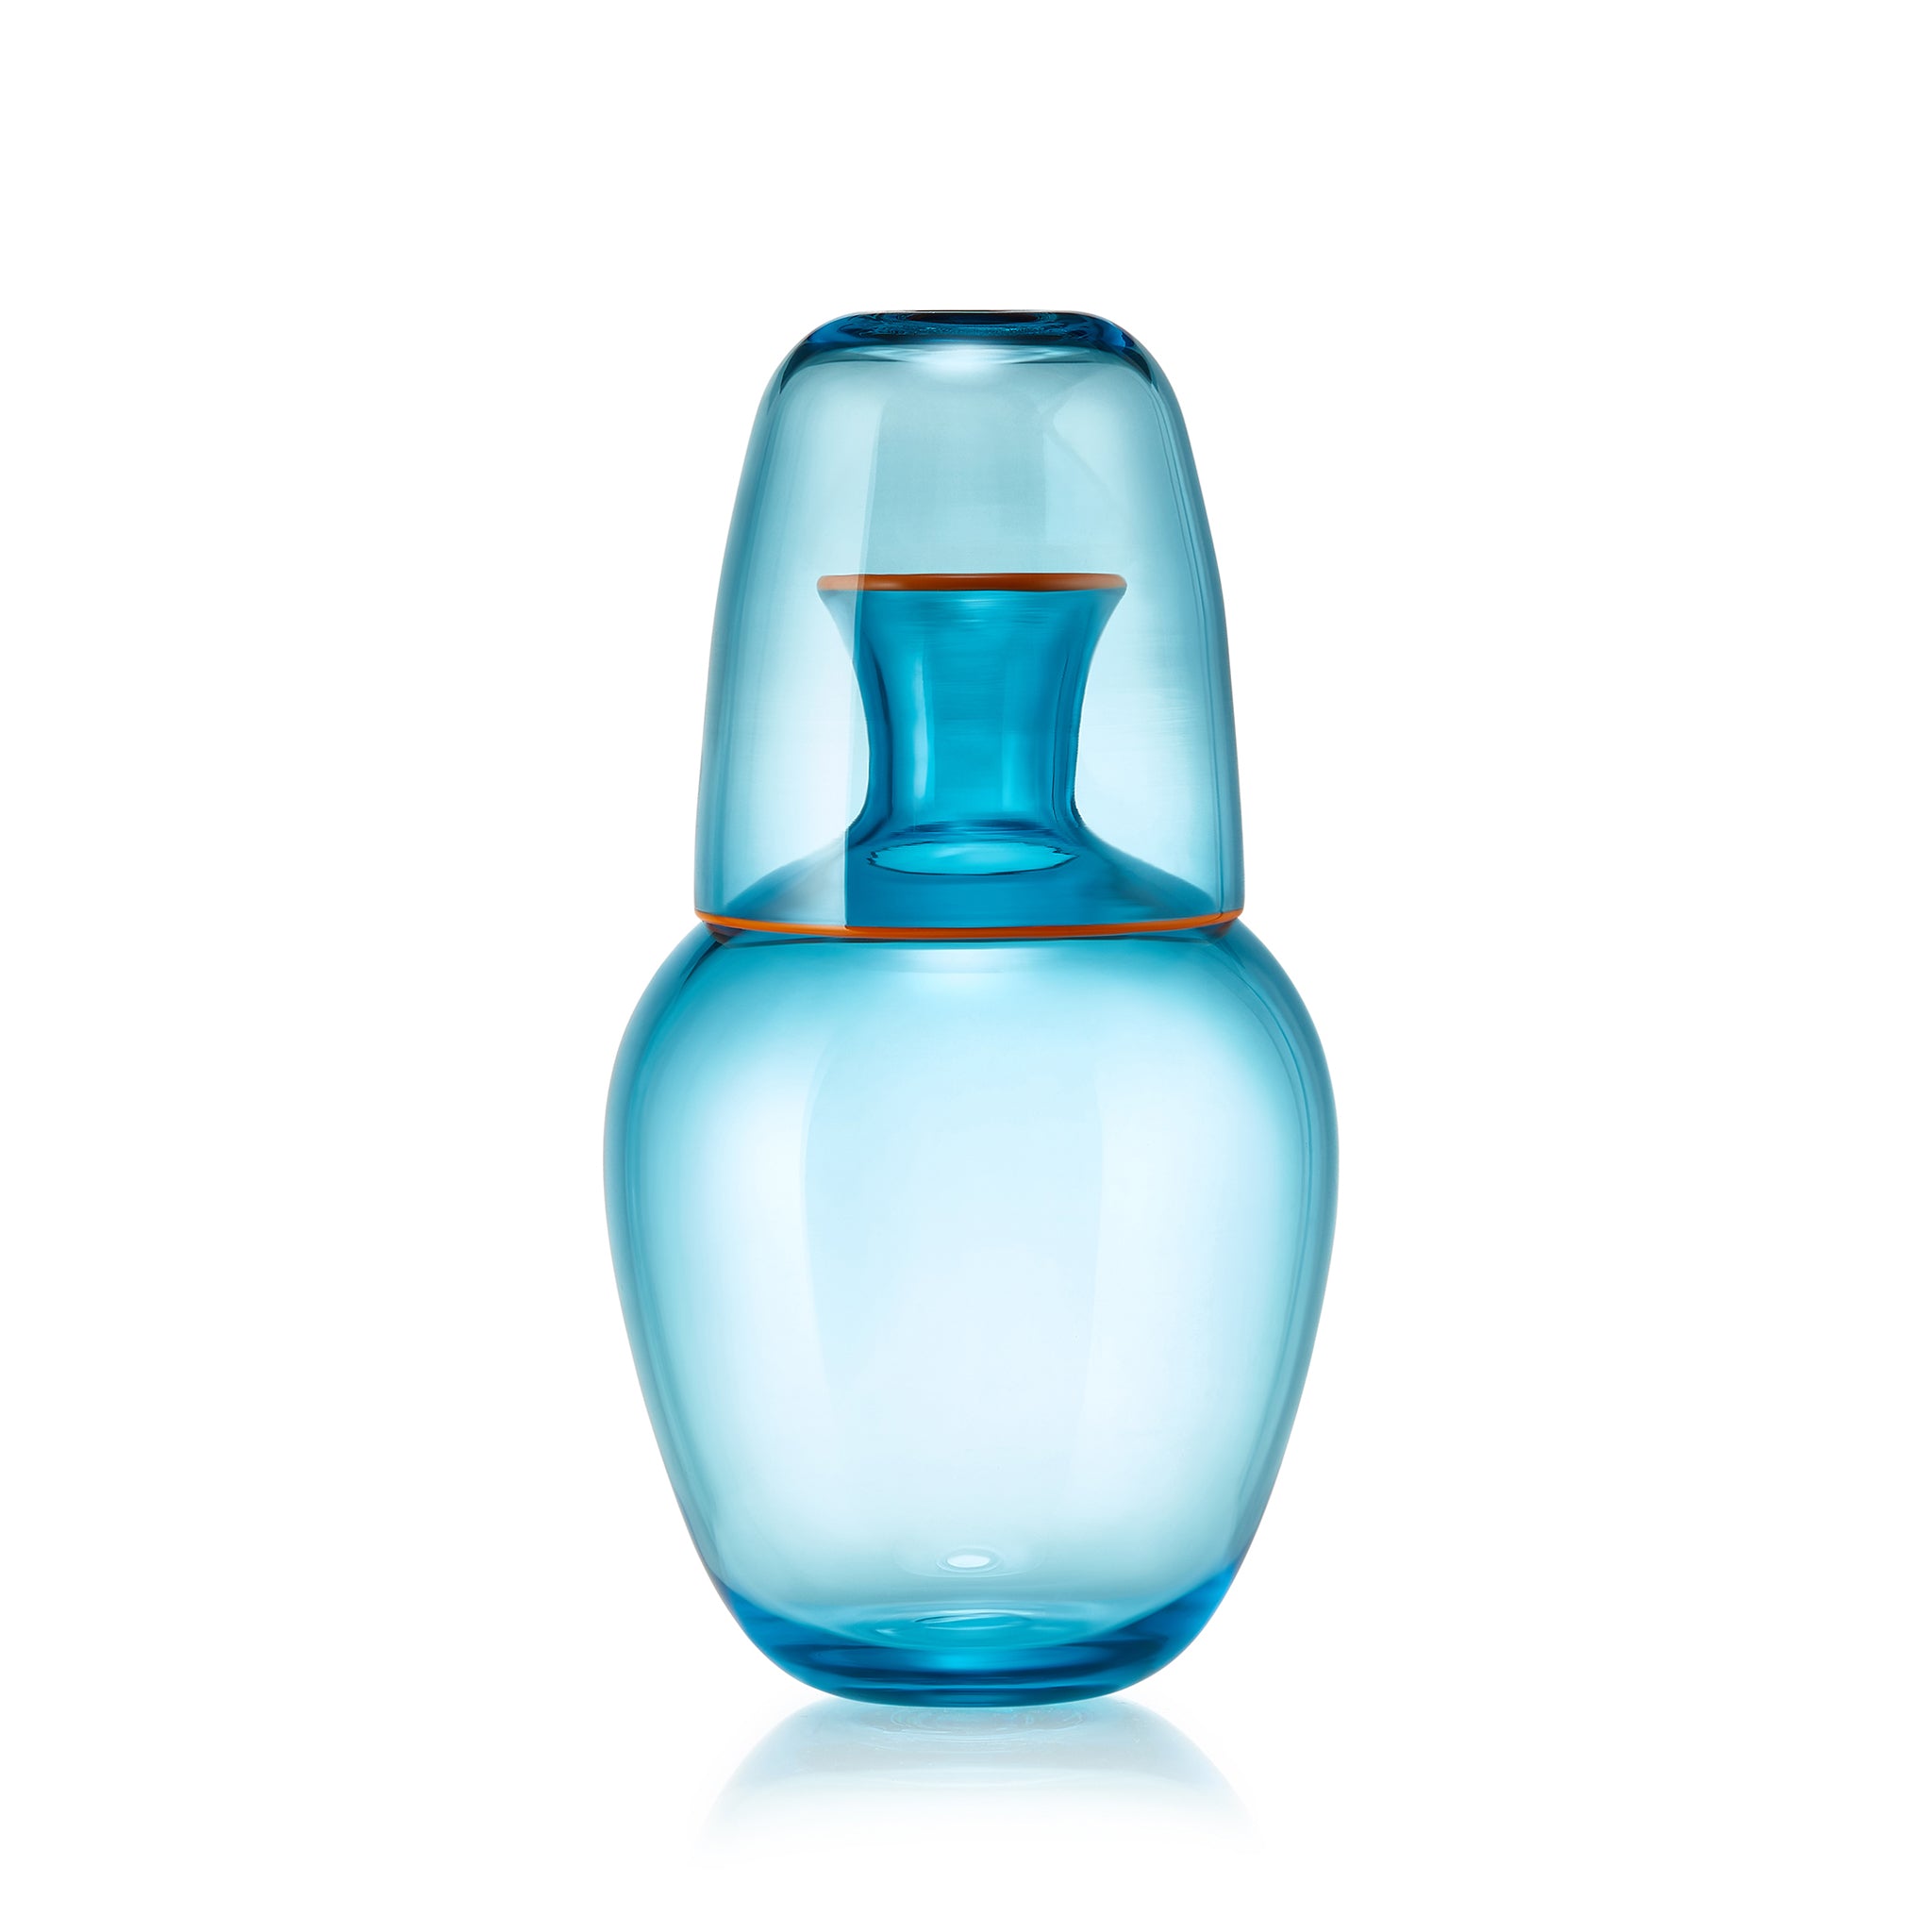 Handblown Glass Bumba Bedside Carafe and Glass Set in Turquoise with Orange Rim, 0.5L